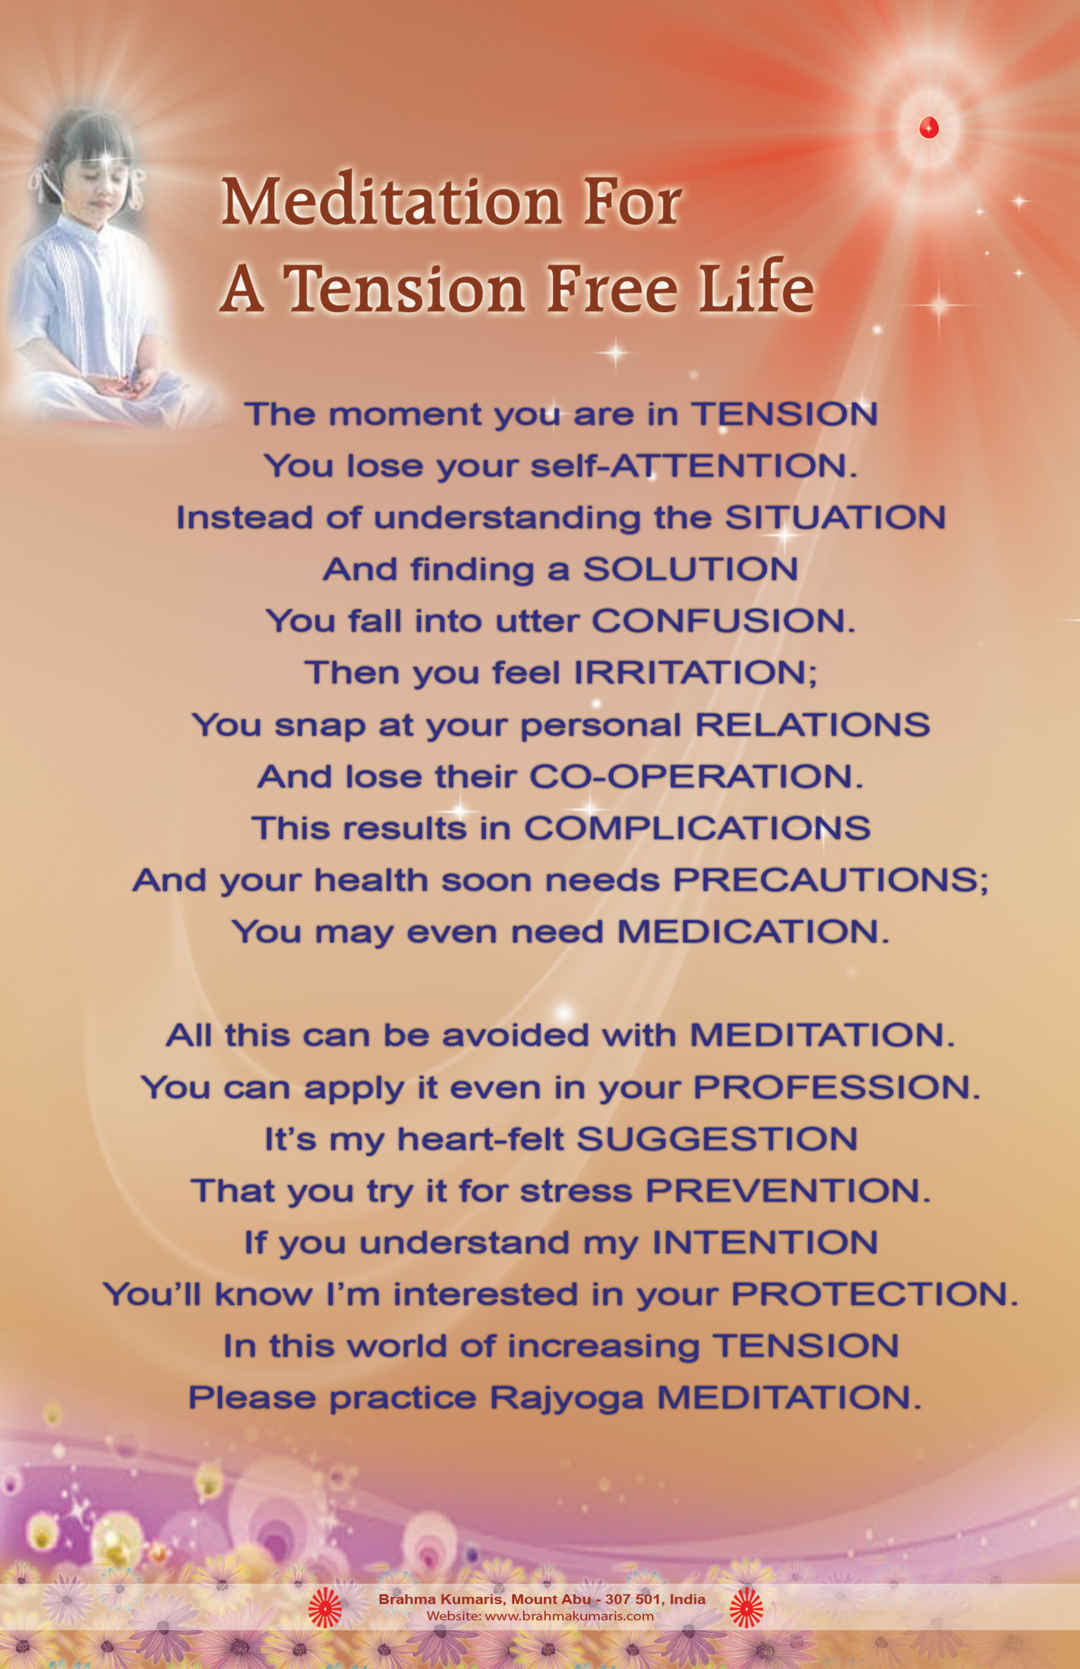 Meditation for a tension free life